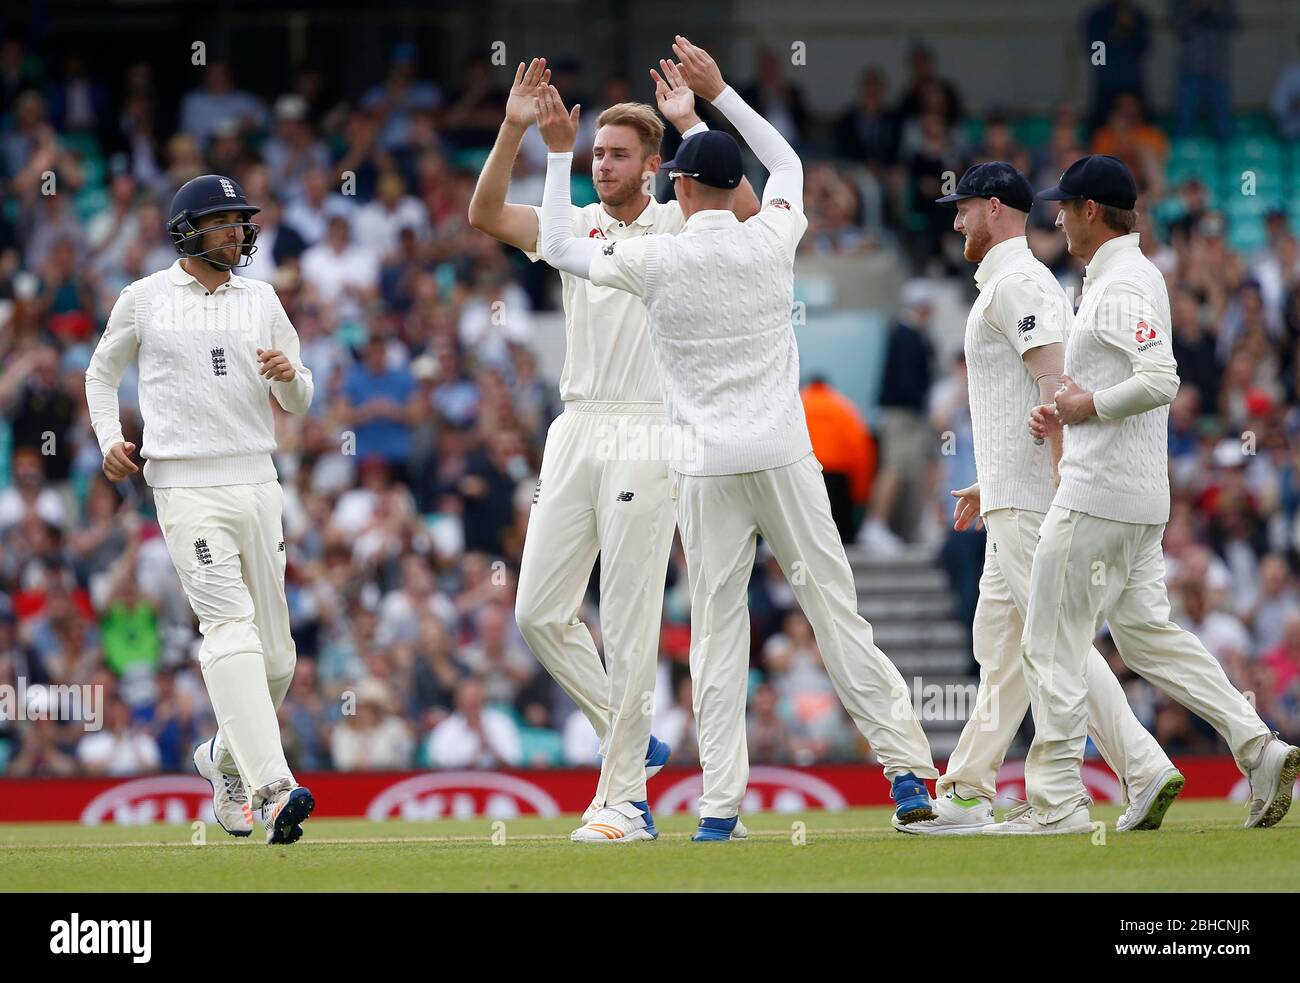 Stuart Broad of England celebrates bowling Heino Kuhn of South Africa during day four of the third Investec Test match between England and South Africa at The Oval in London. 30 Jul 2017 Stock Photo